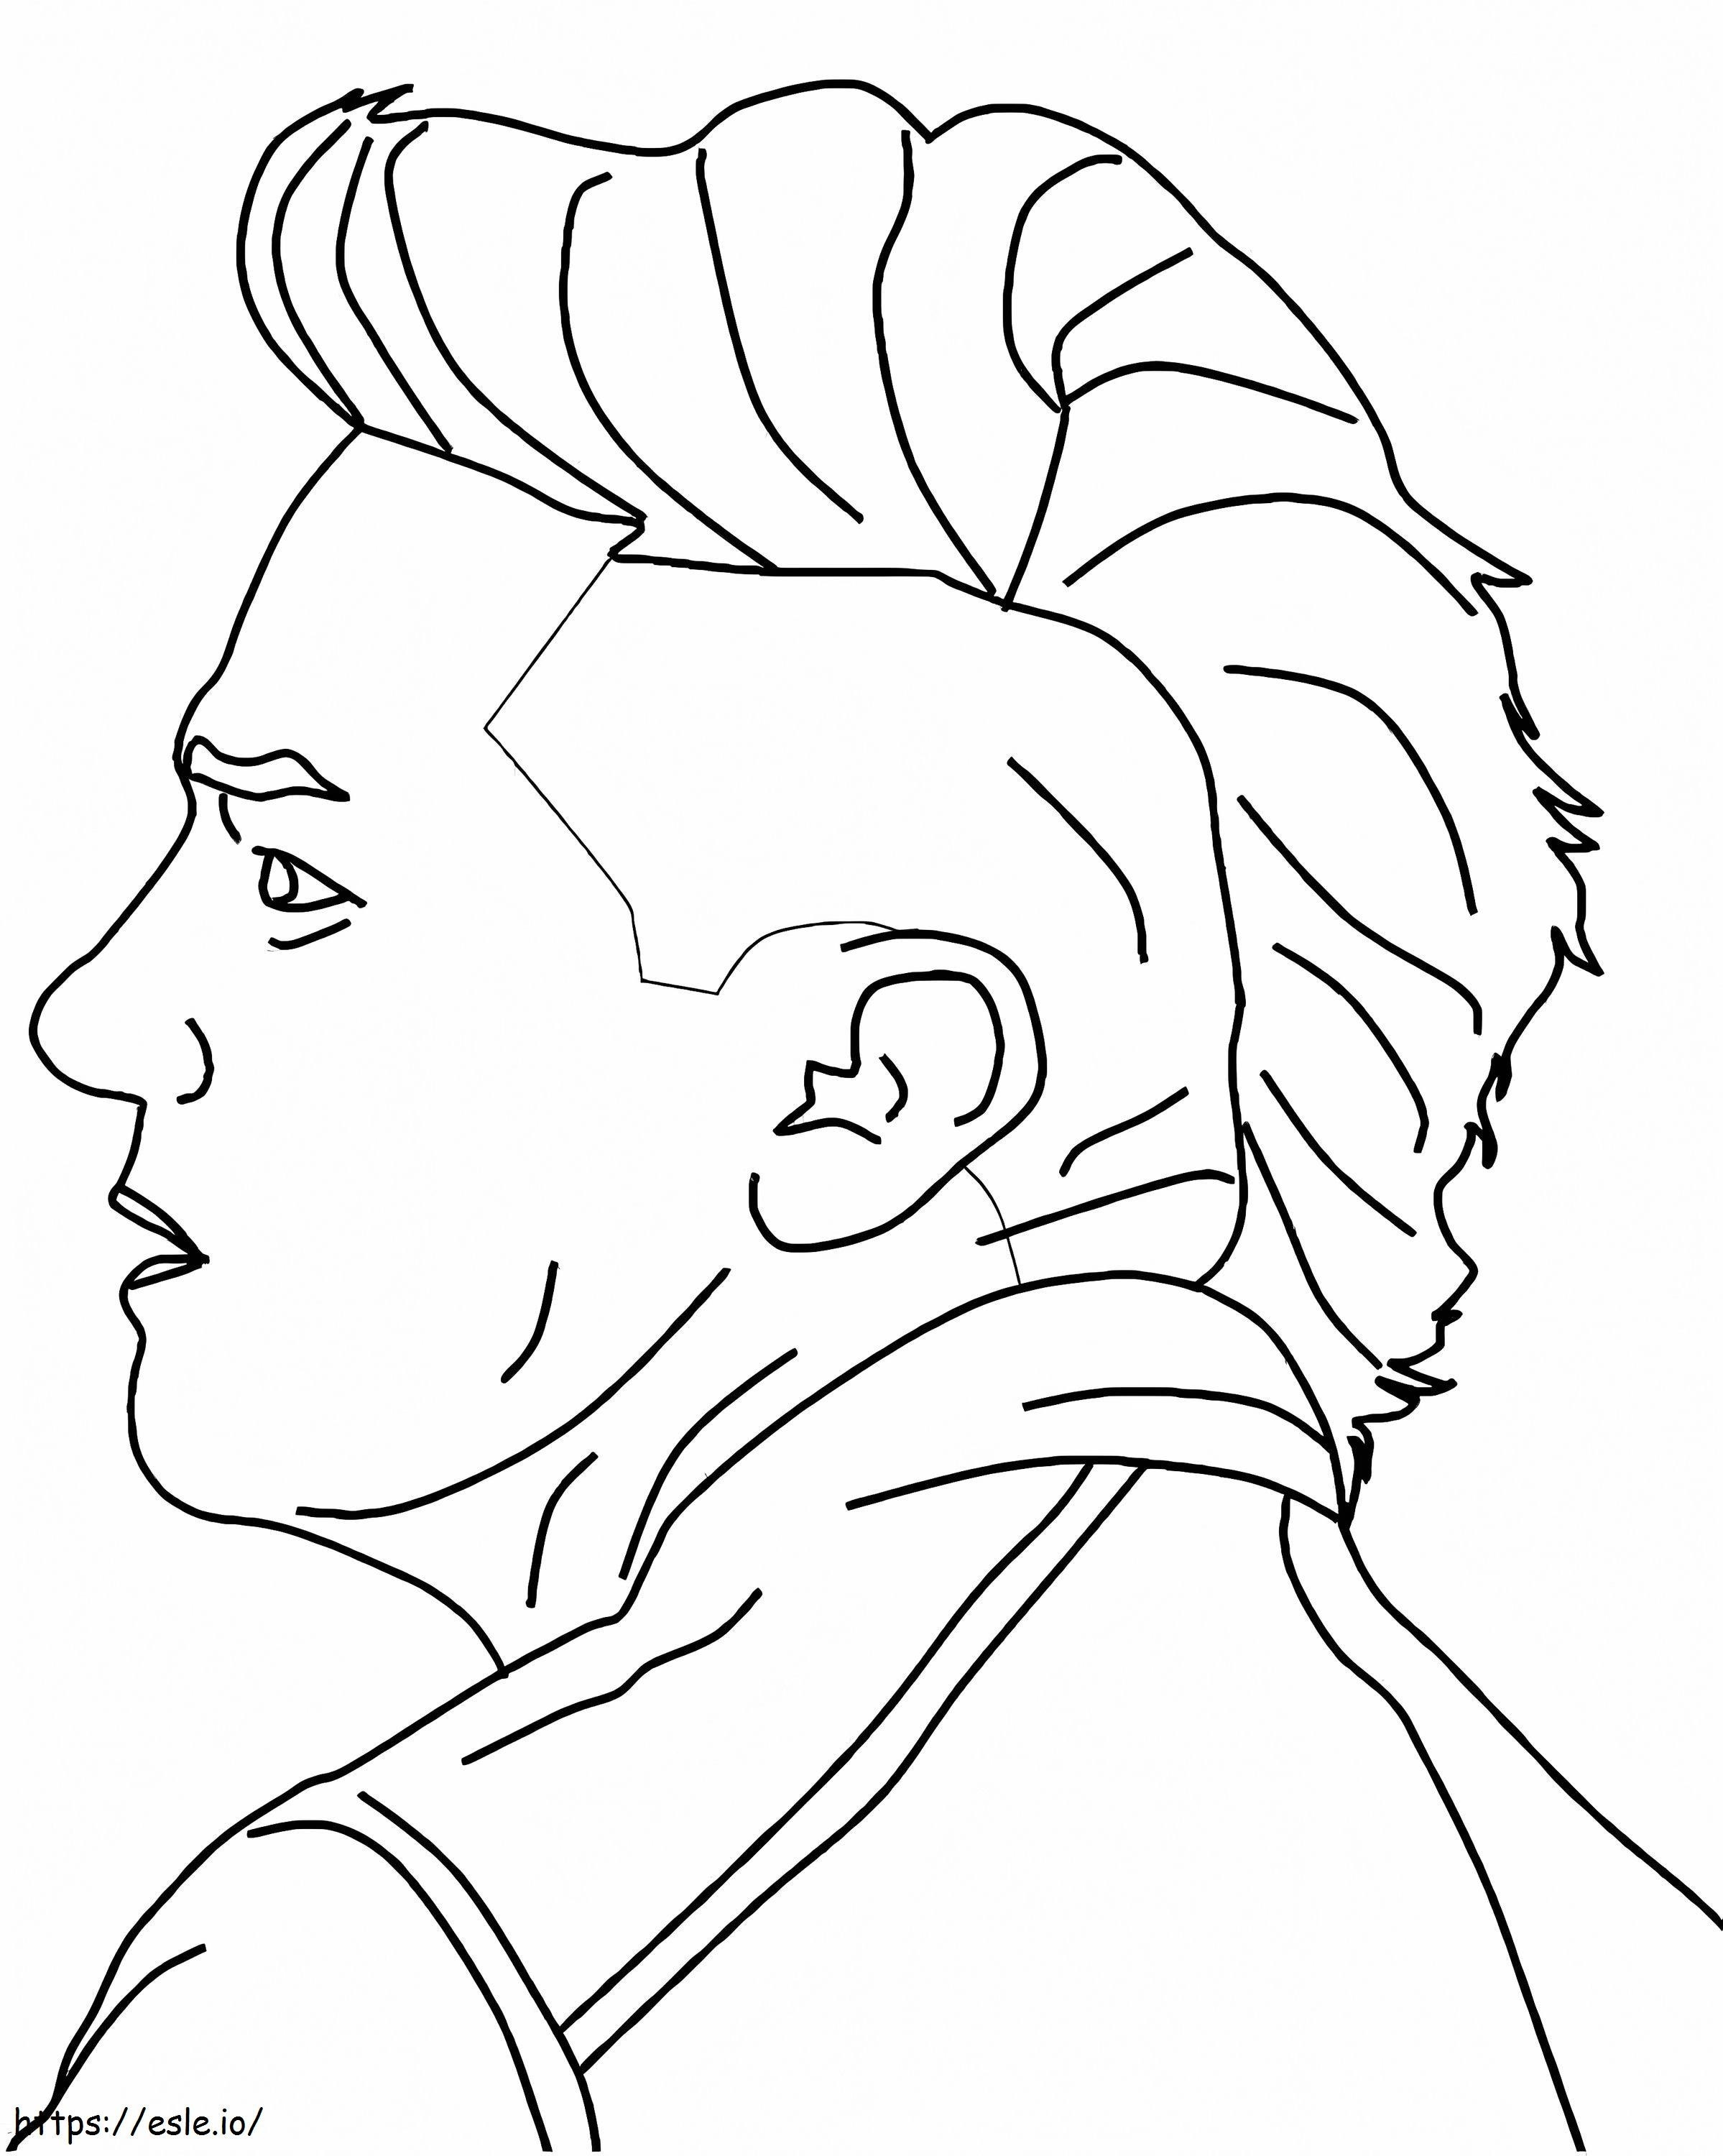 Face Hawkeye In Endgame coloring page